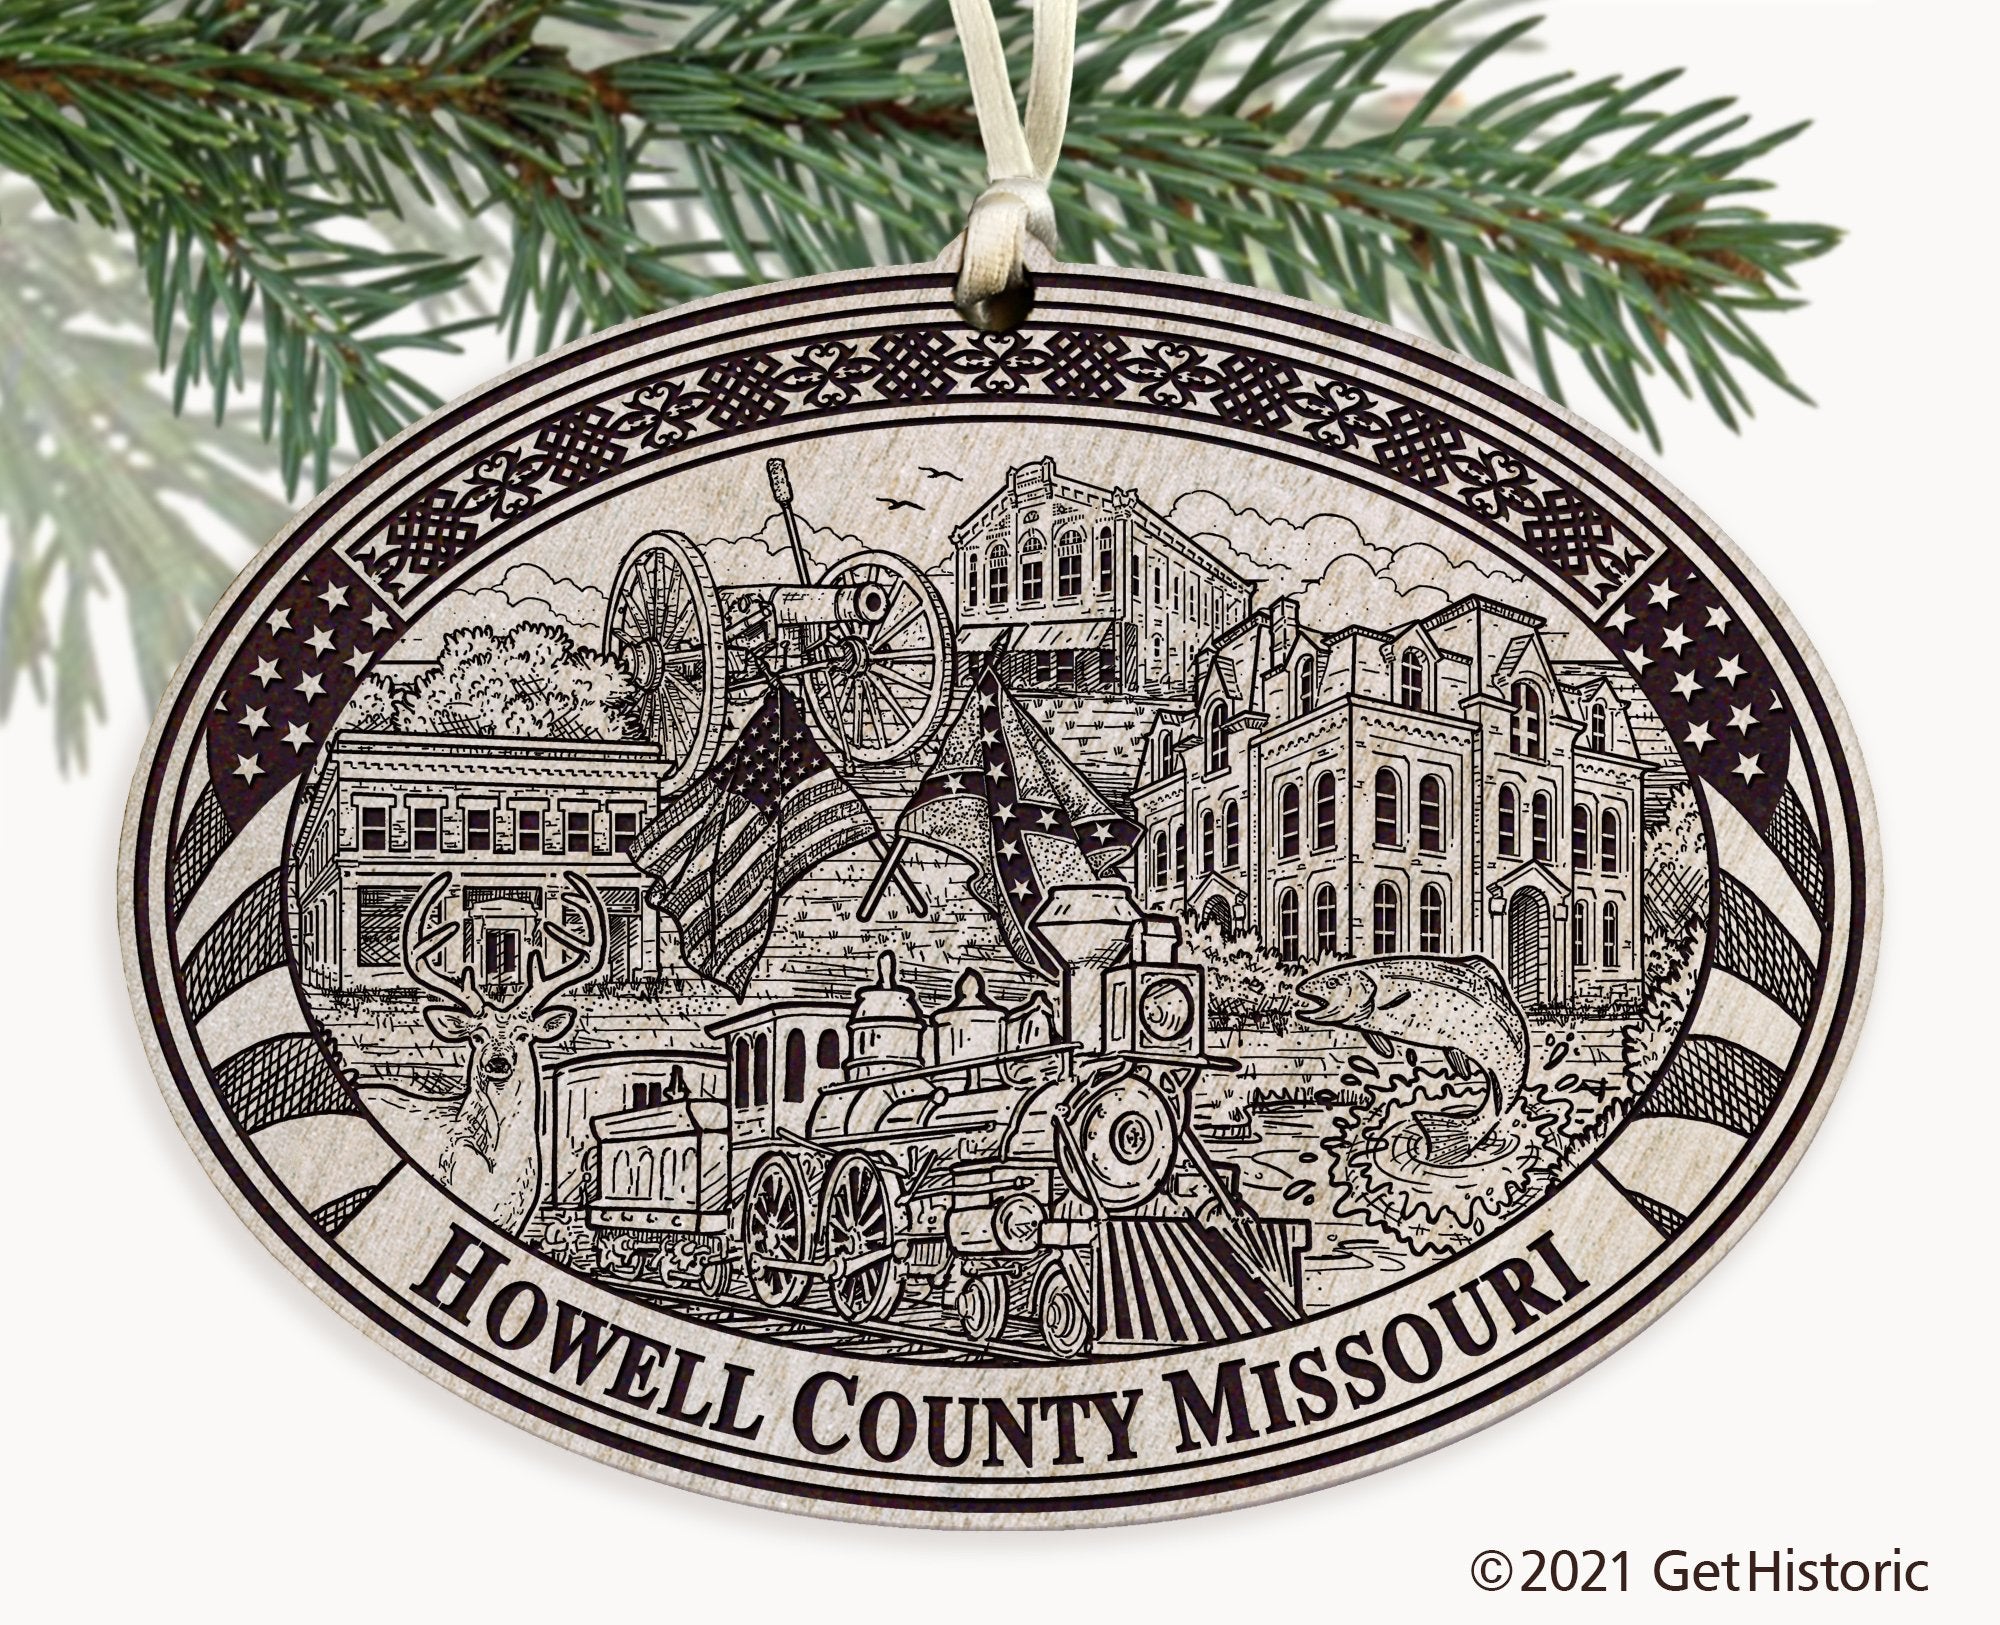 Howell County Missouri Engraved Ornament